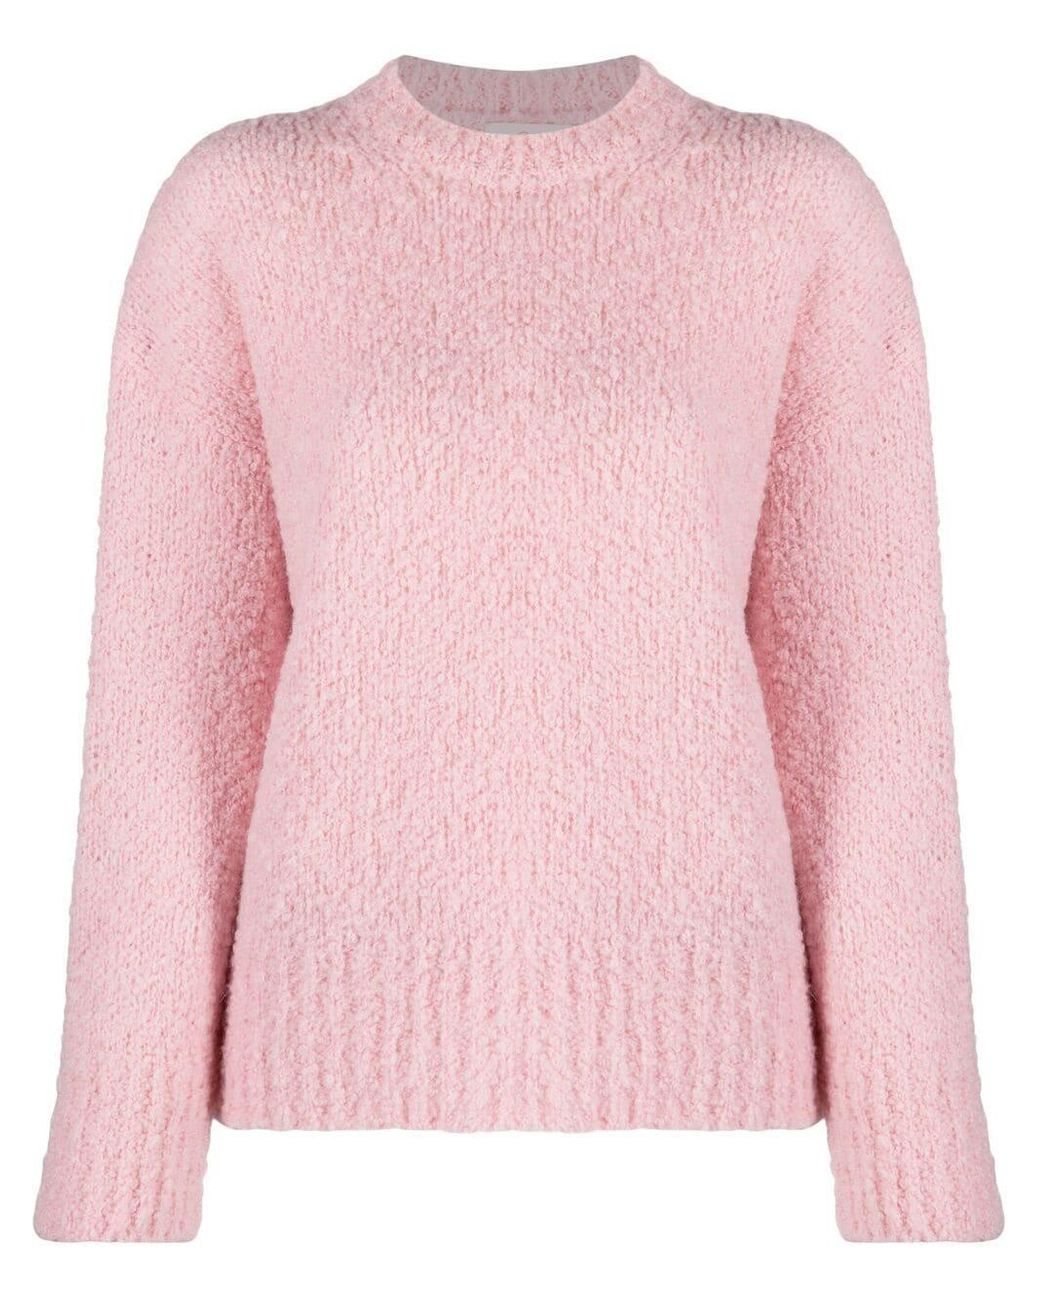 Tory Burch Wool Crew-neck Chunky Knit Jumper in Pink - Lyst